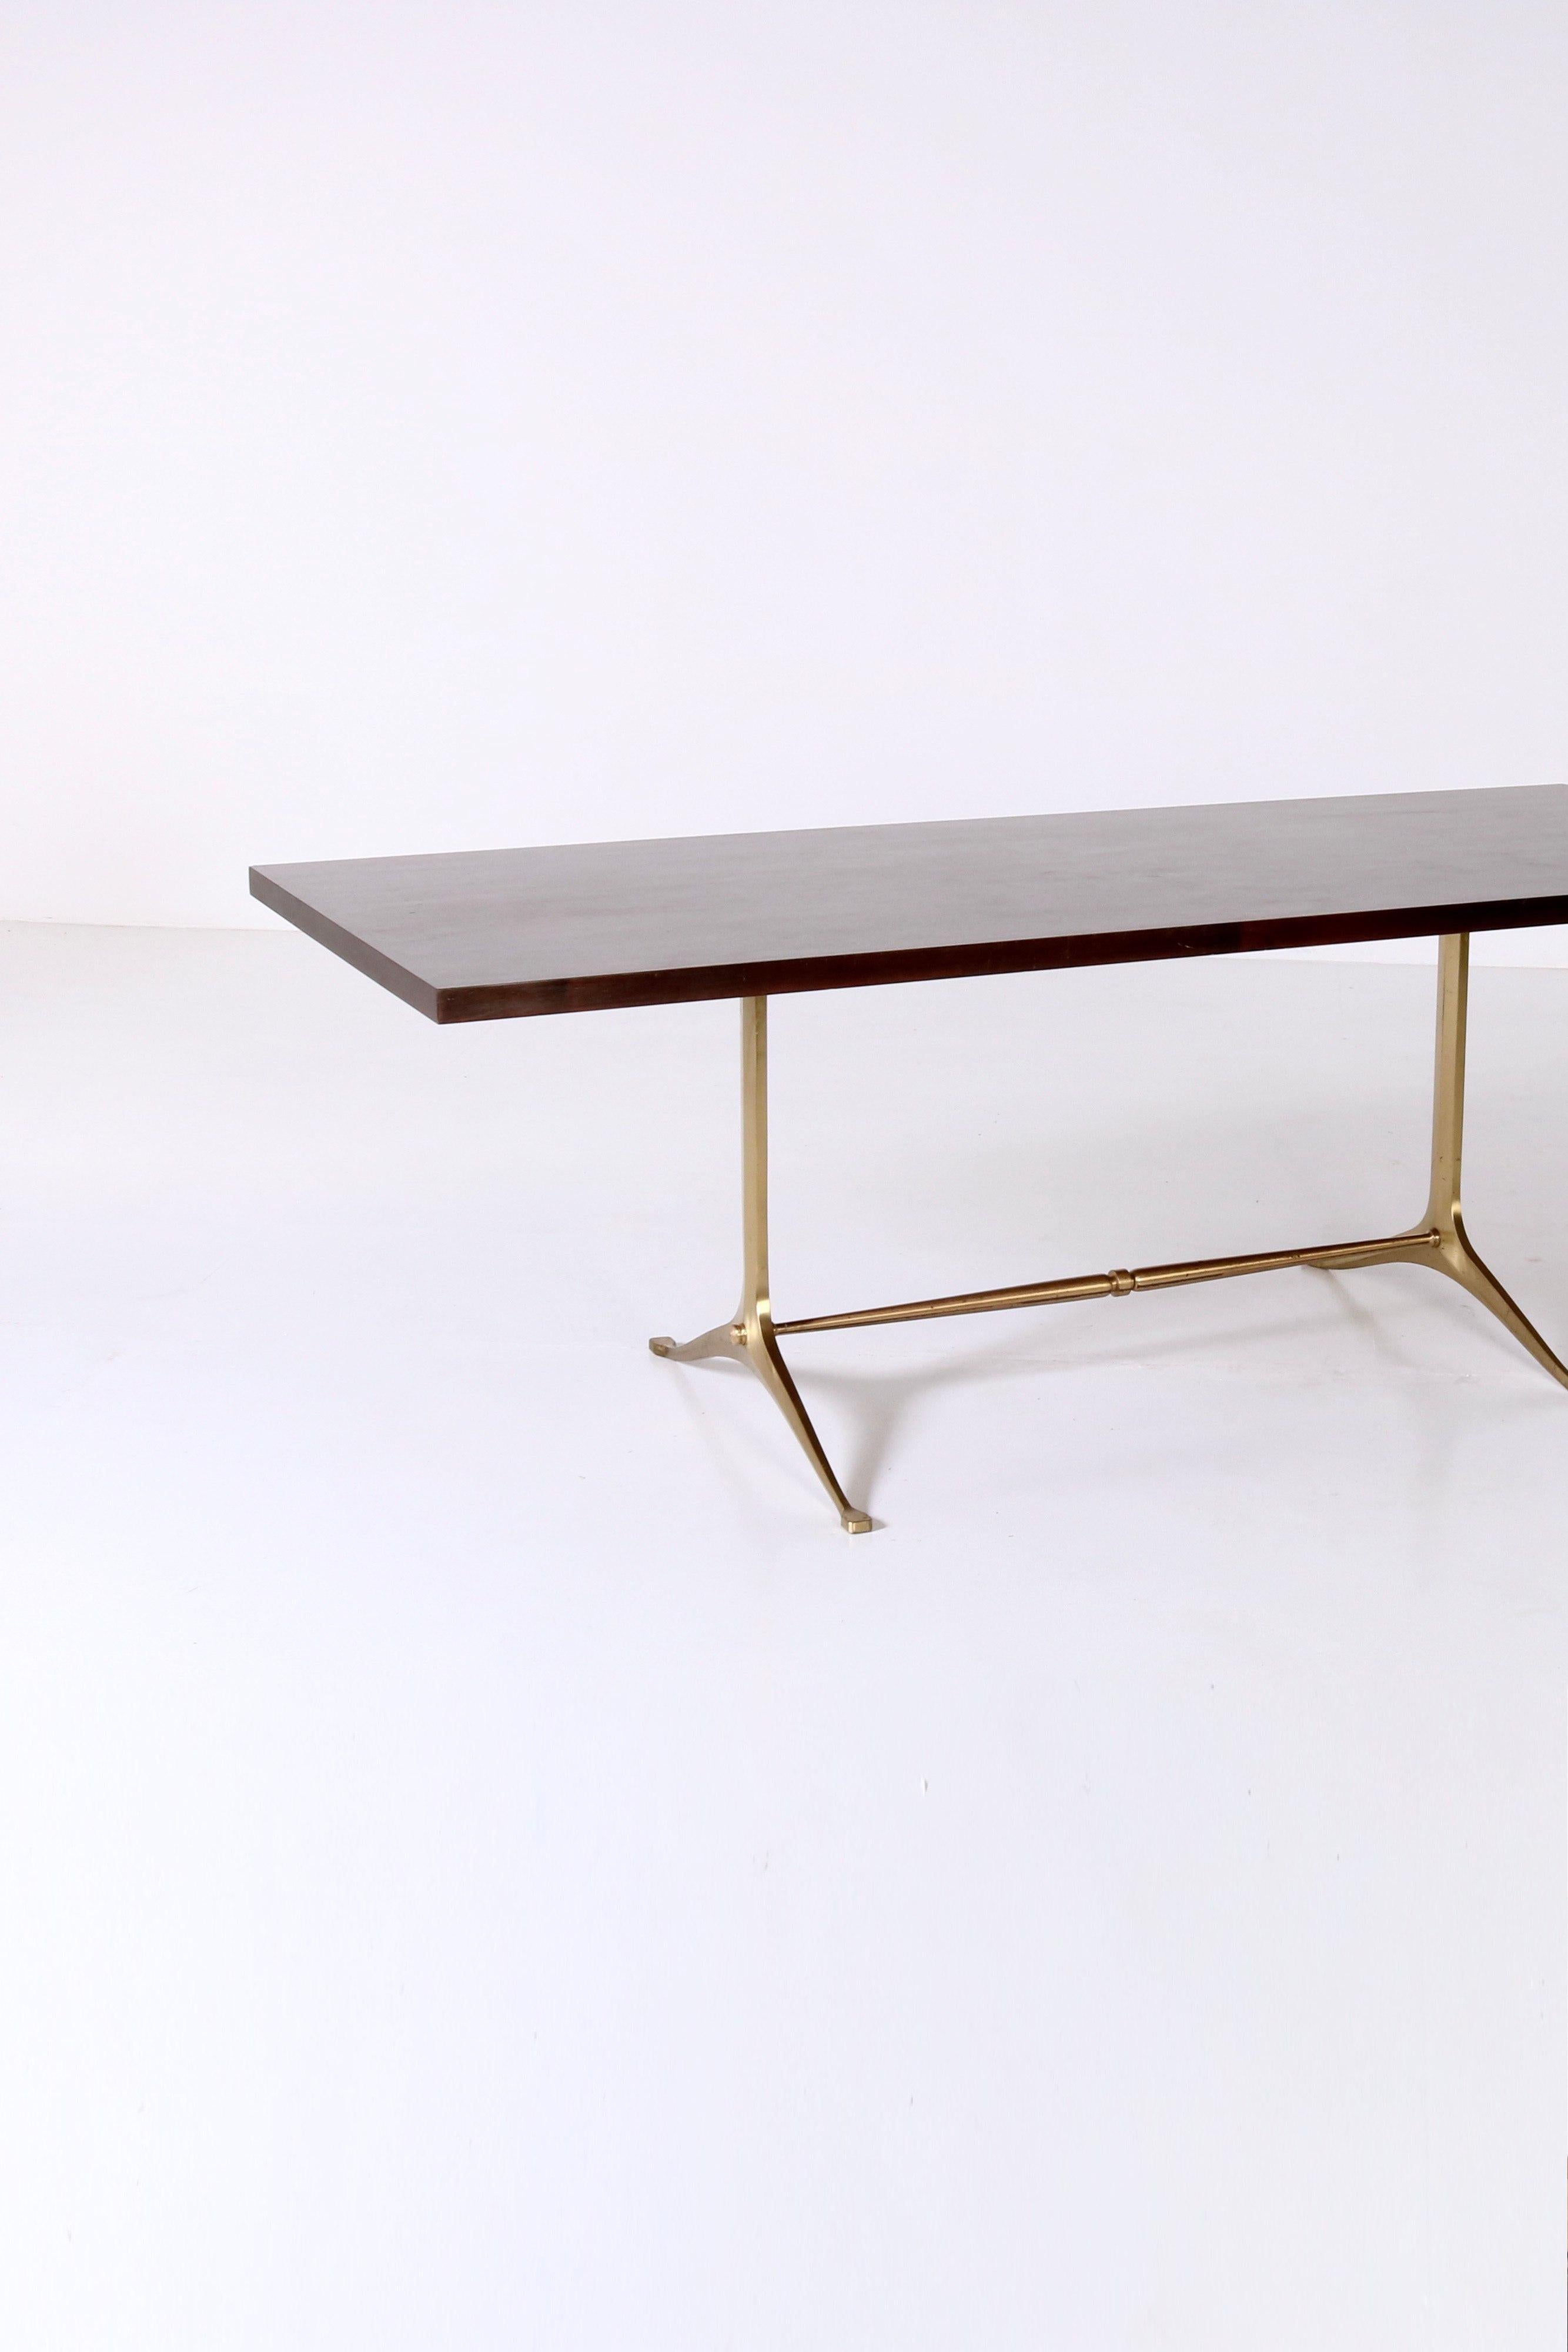 Wood Table by Melchiorre Bega, 60s For Sale 2